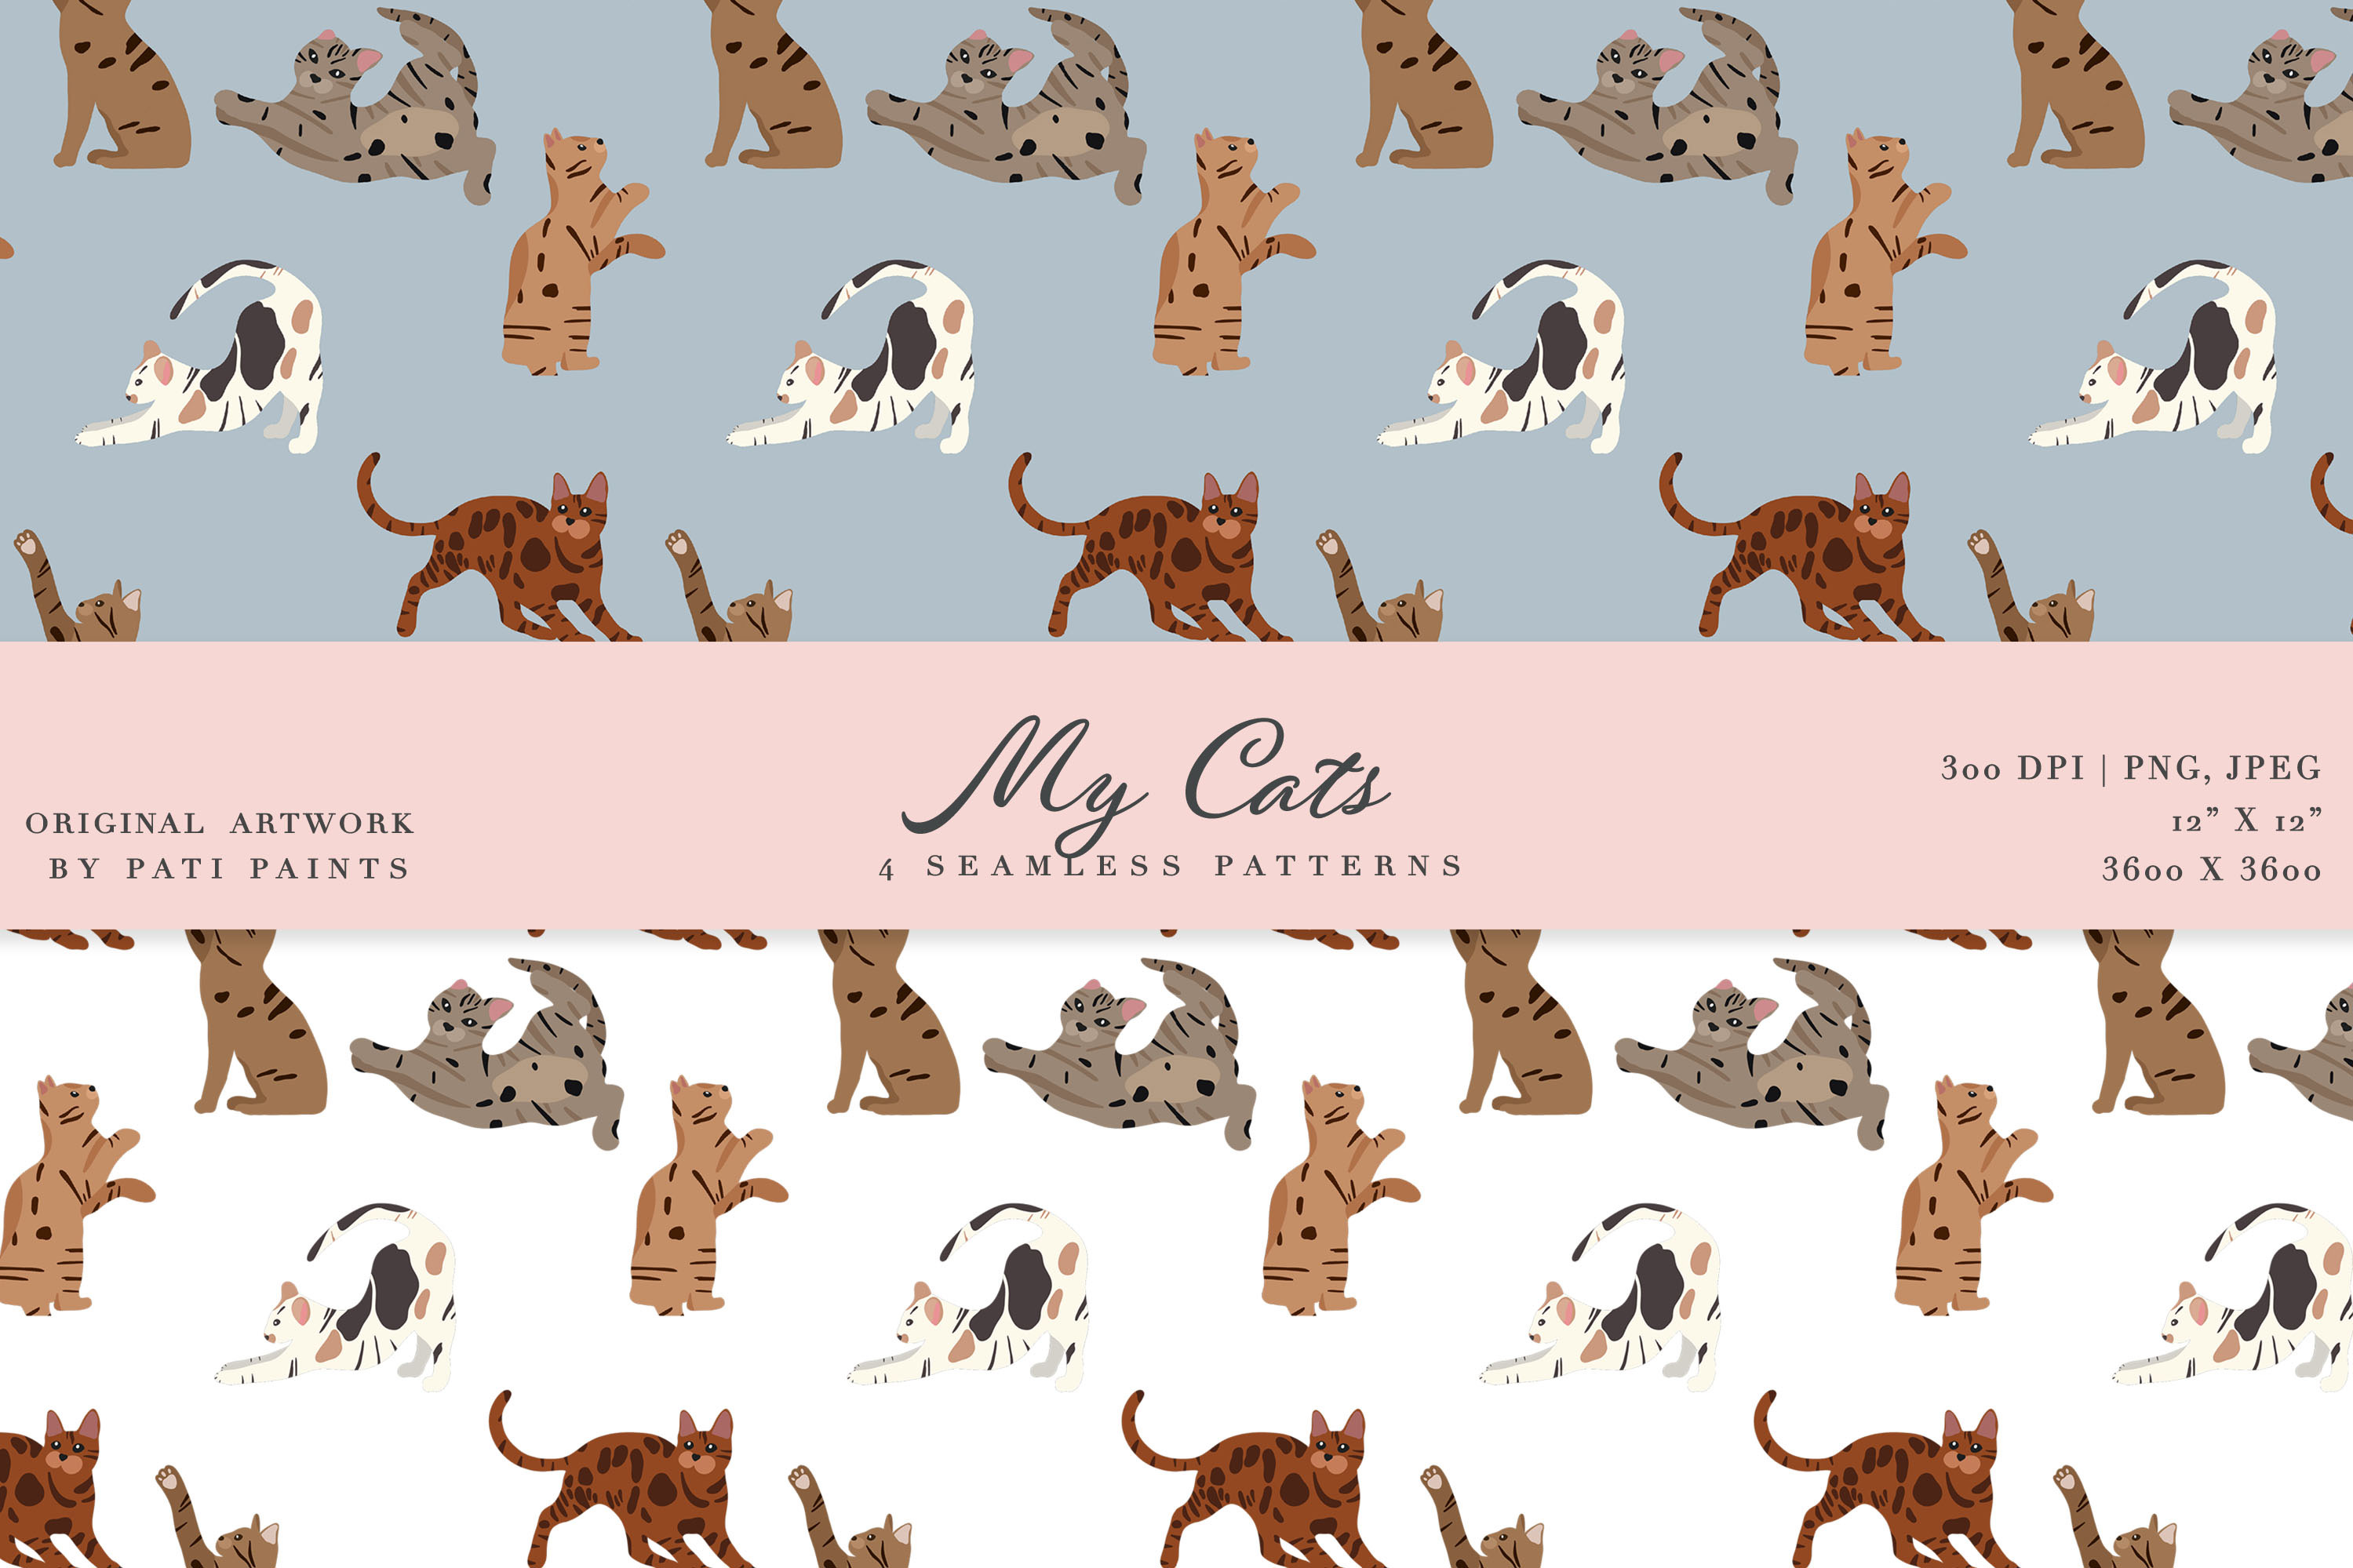 Cats illustrations pack